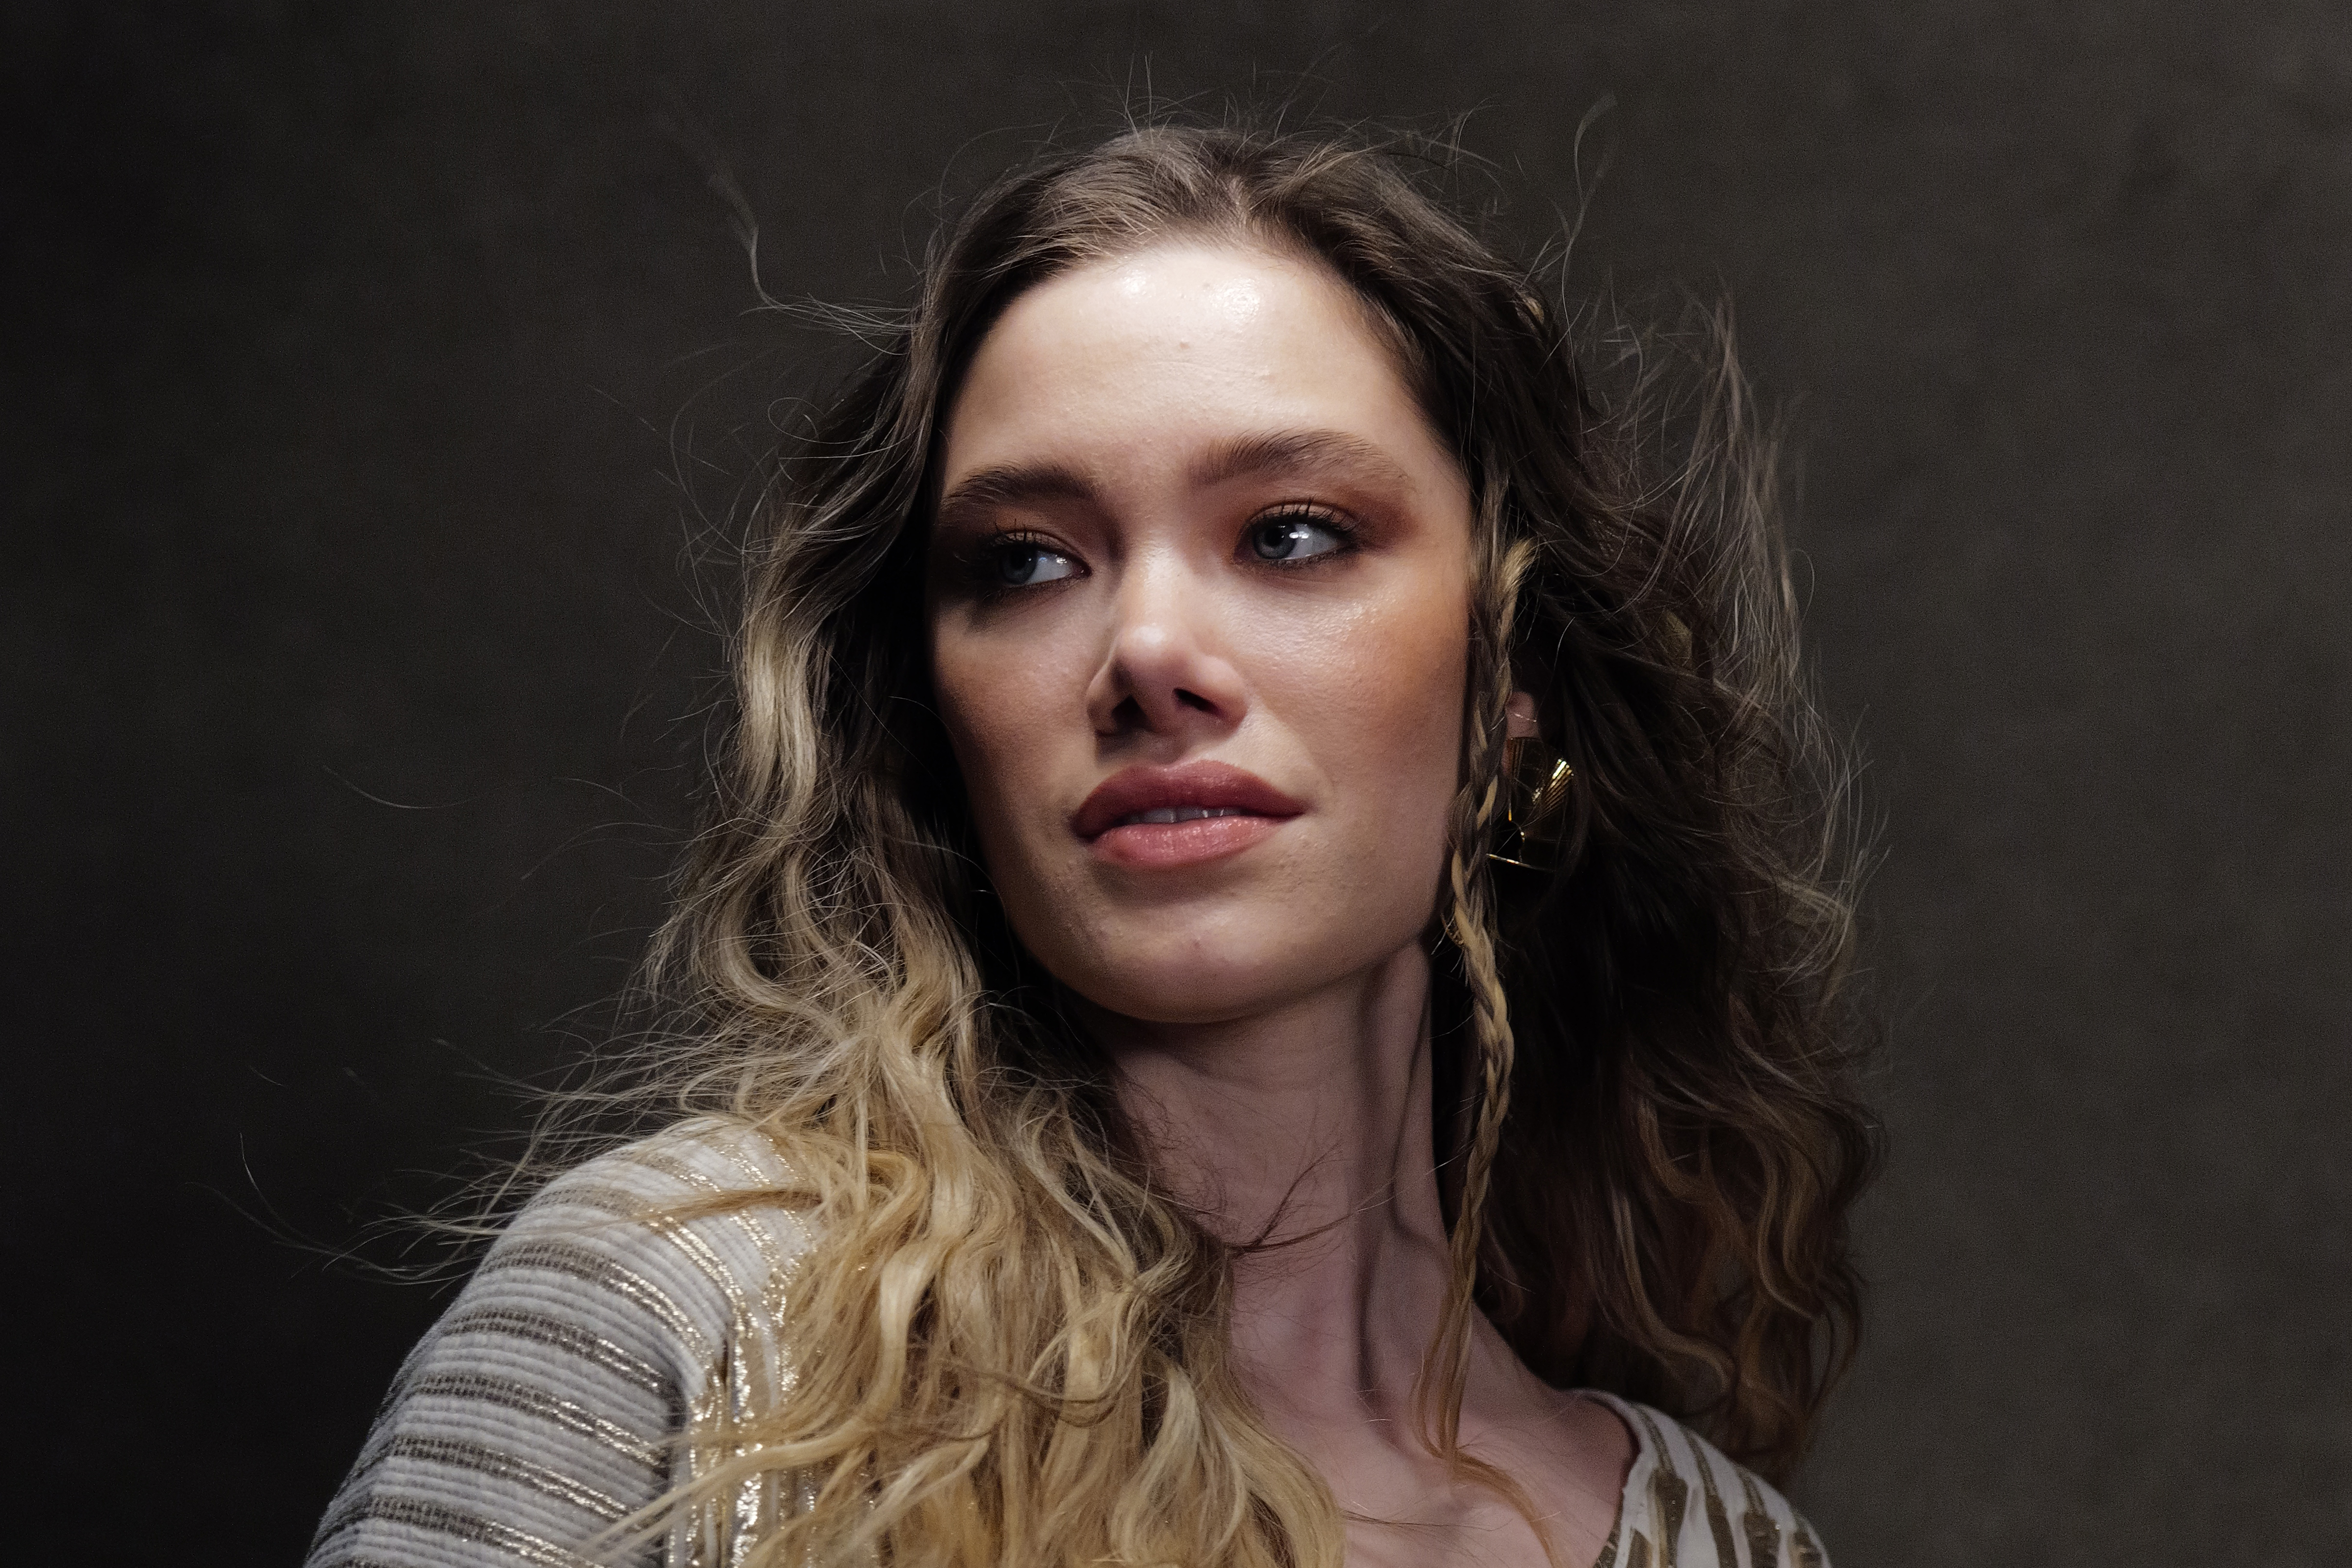 A sample photo of a model taken on the Leica SL3 camera